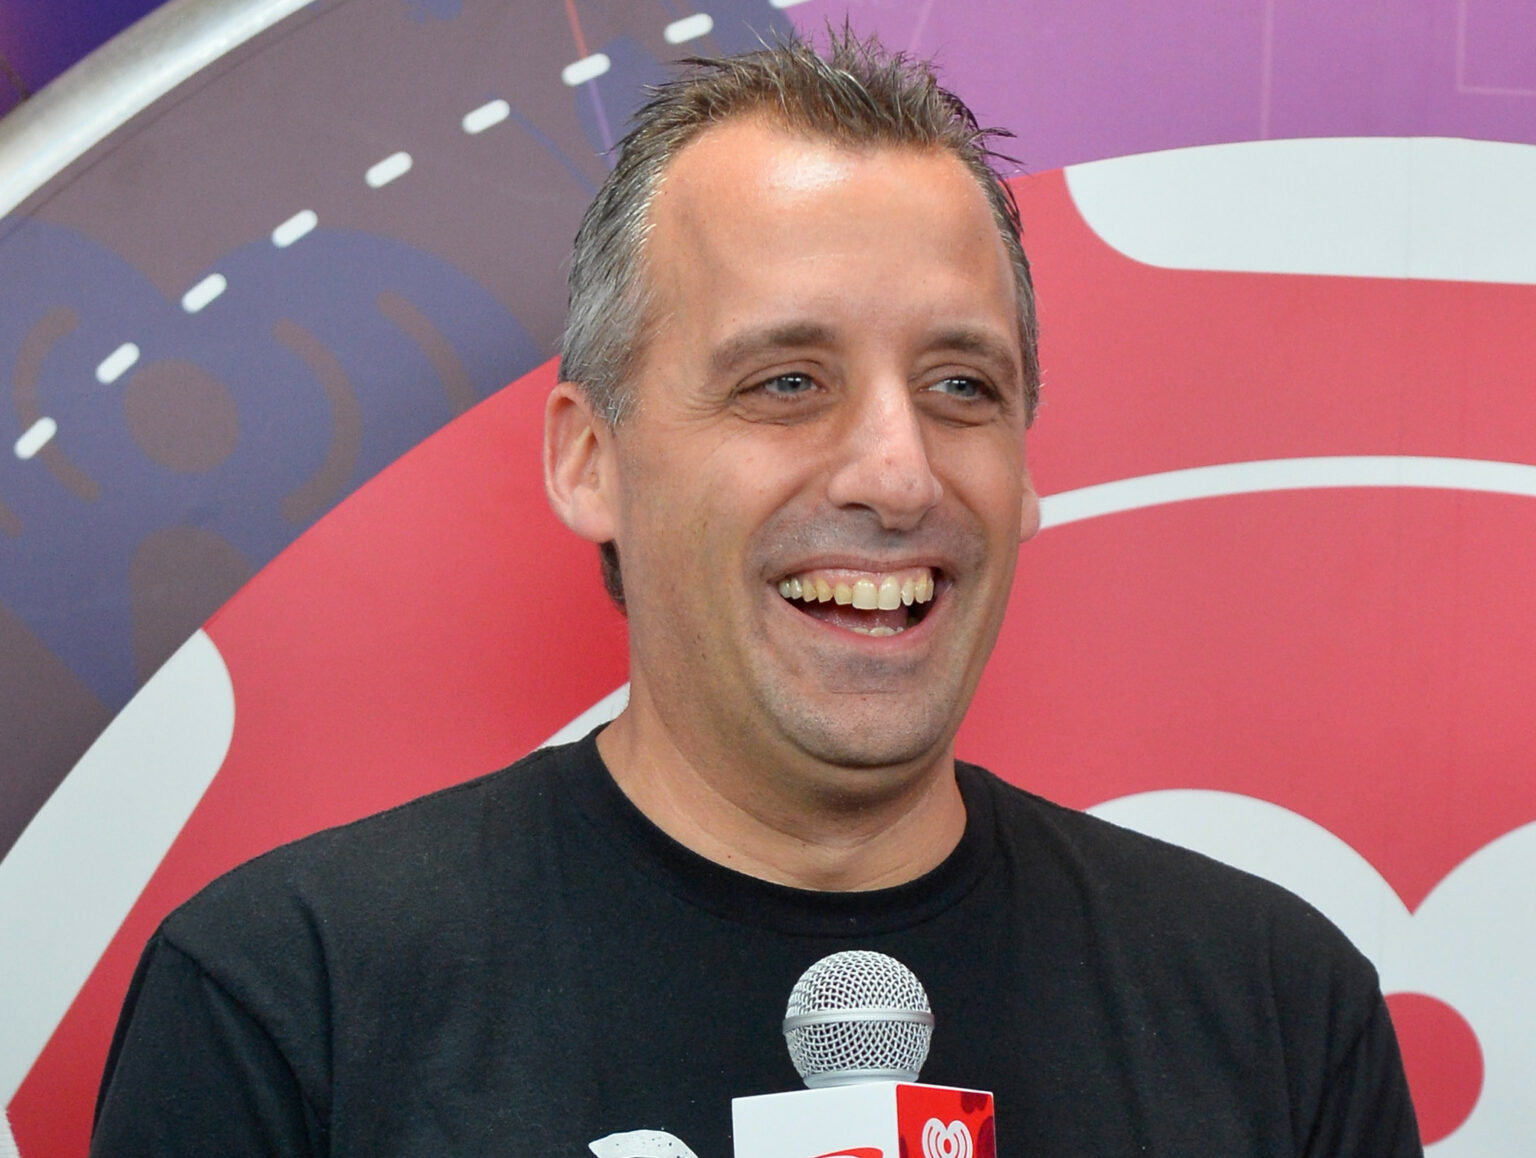 Joe Gatto and his Relationship with the Rest of the Group: A Look into their Friendship Dynamics.